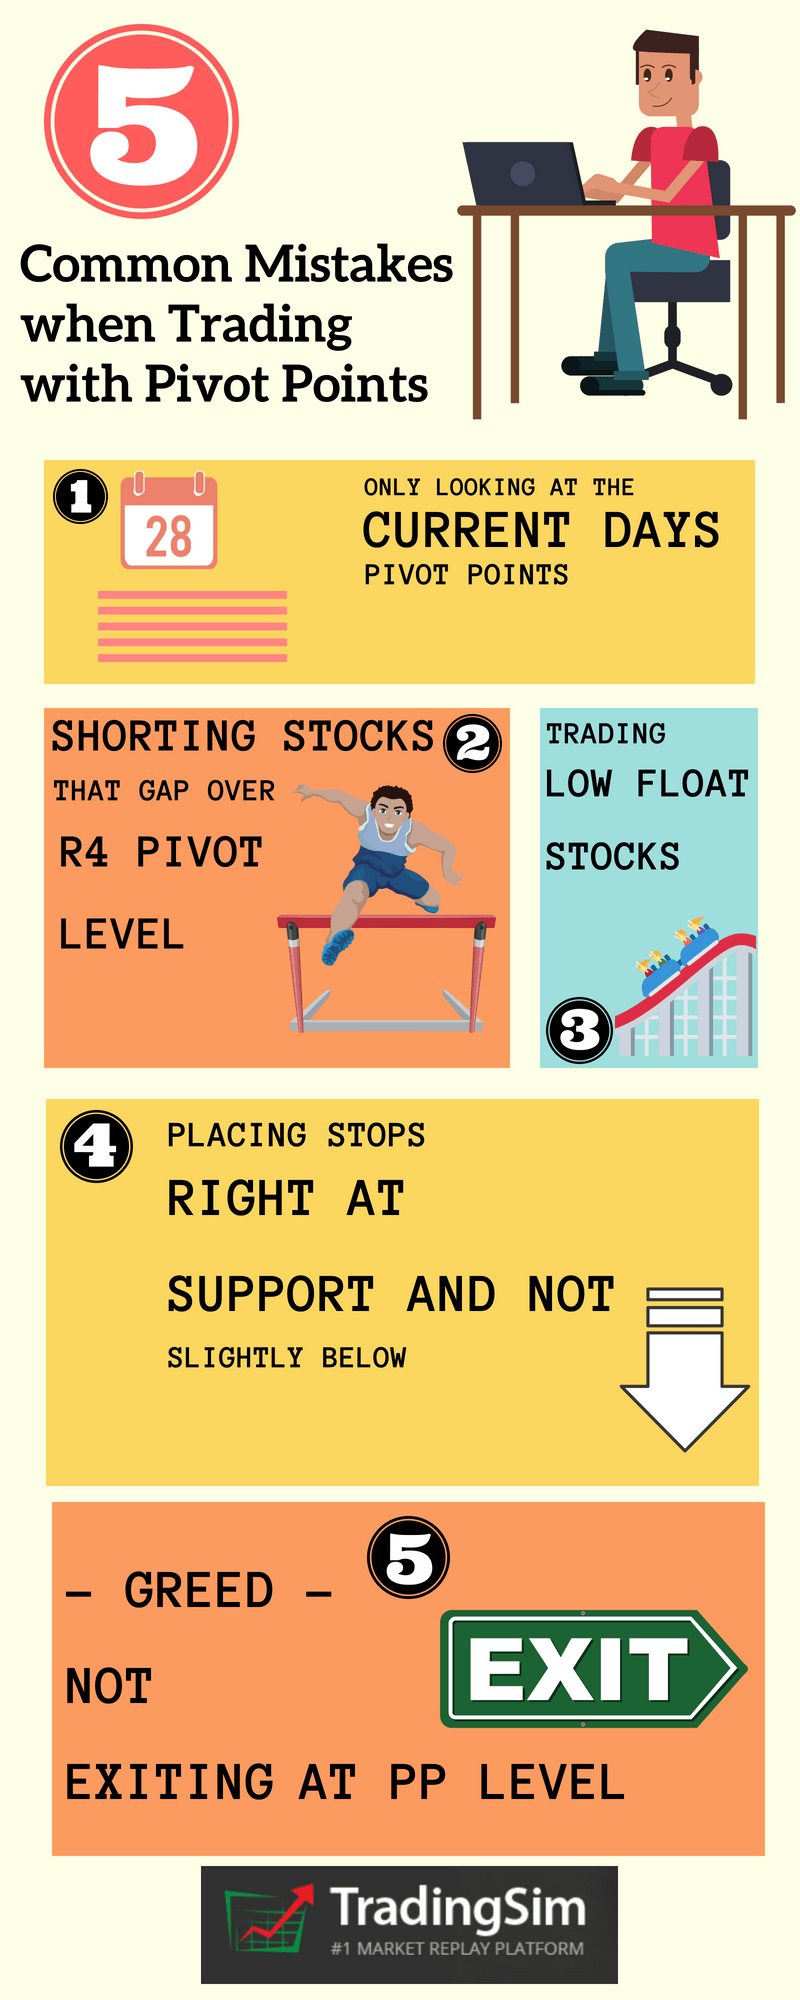 5 Common Mistakes when Trading with Pivot Points 1. Only looking at teh current days pivot points 2. Shorting stocks that gap over R4 pivot level 3. Trading low float stocks 4. Placing stops right at support and not slightly below 5. Greed - not exiting at PP level